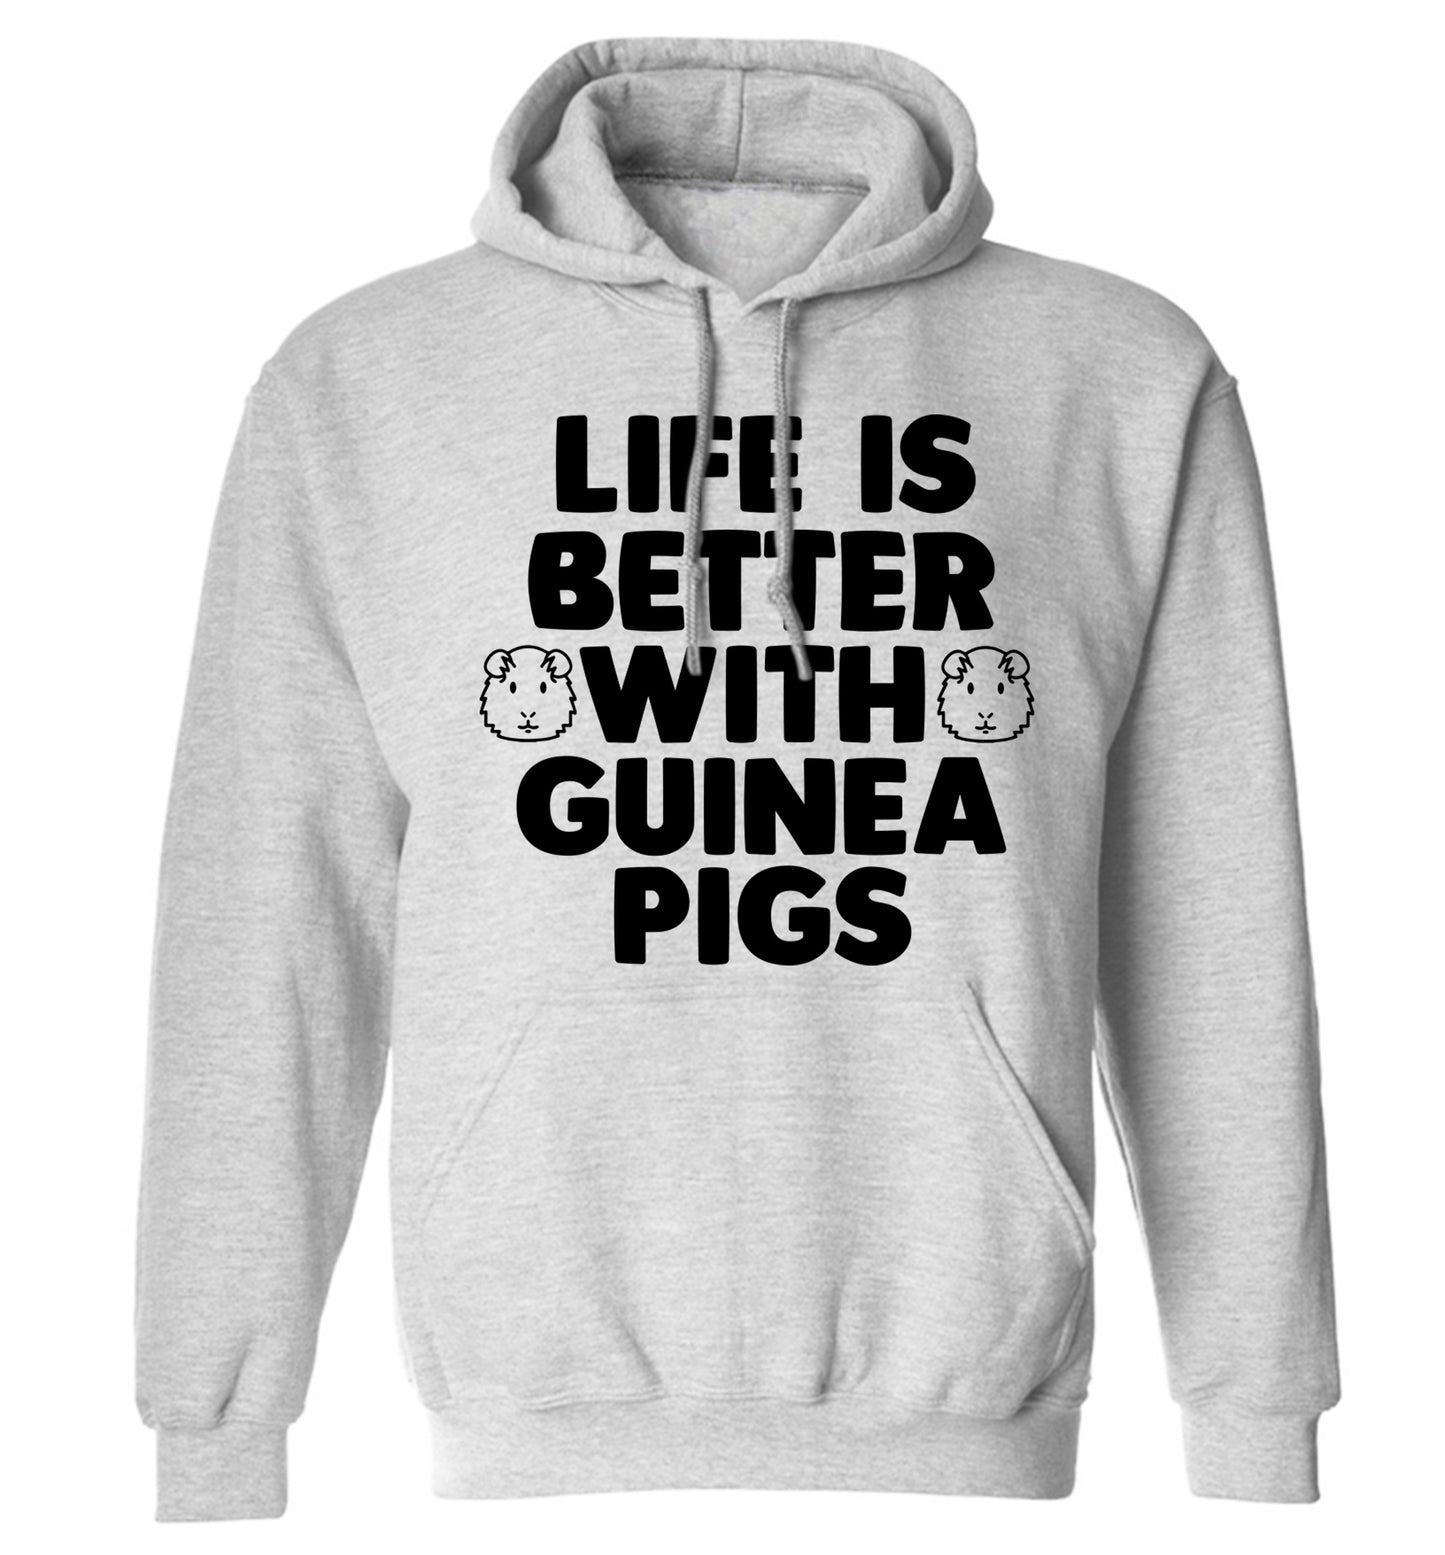 Life is better with guinea pigs adults unisex grey hoodie 2XL